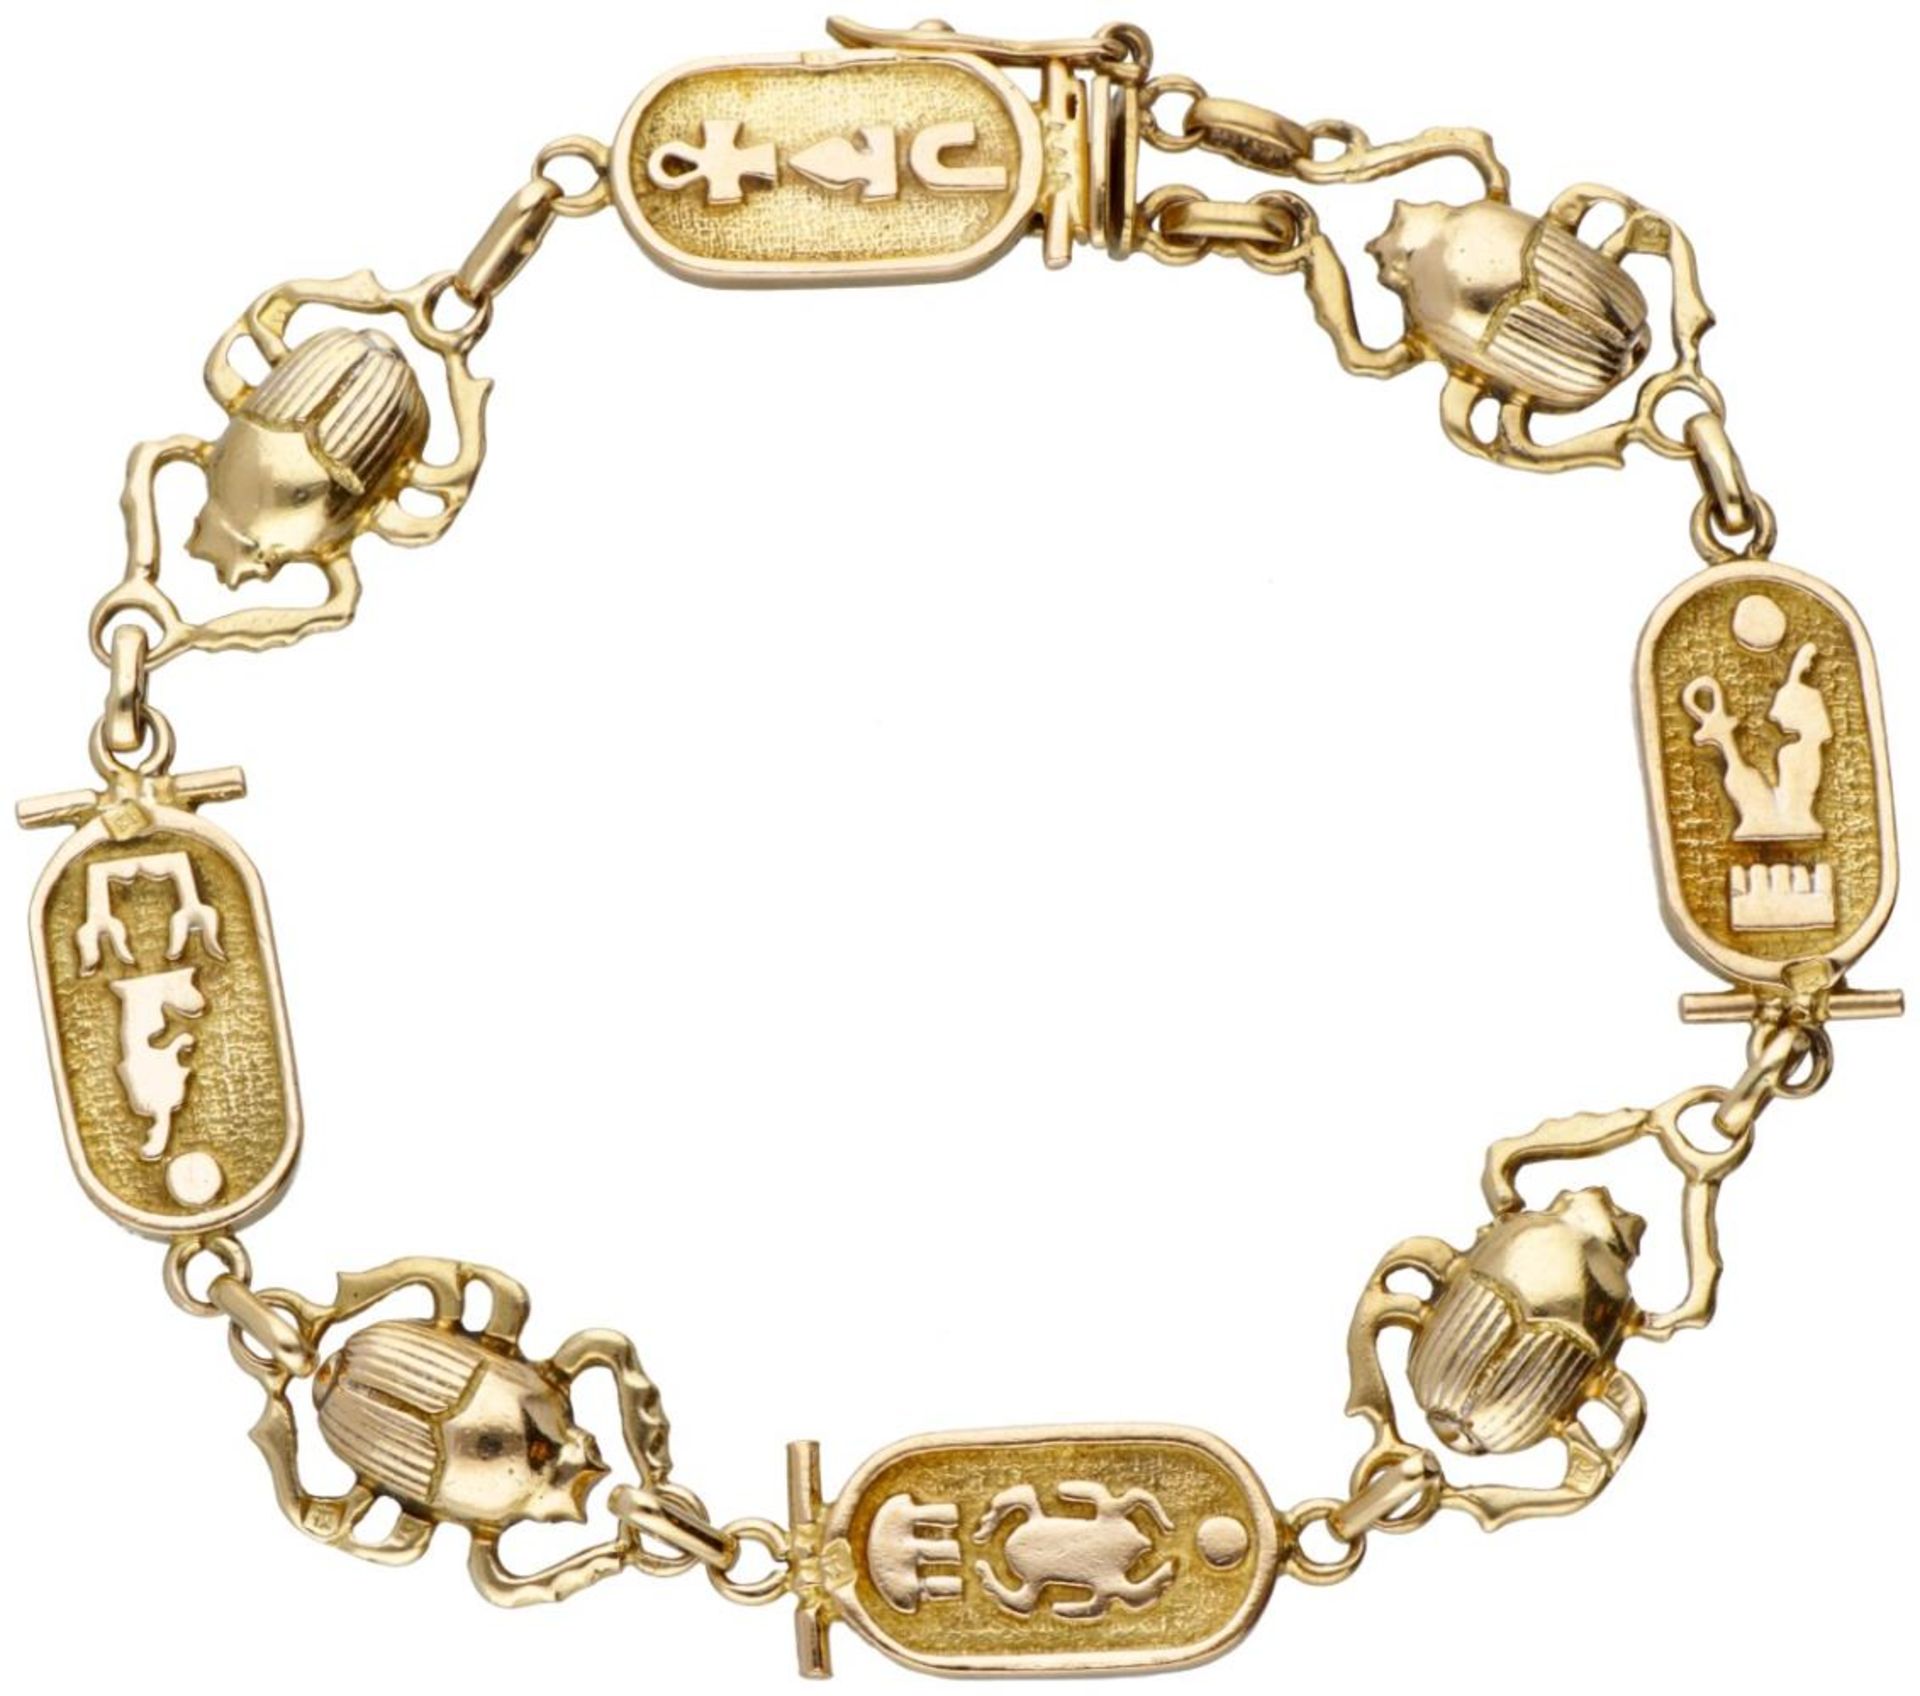 14K. Yellow gold Revival bracelet with hieroglyphs and scarabs.